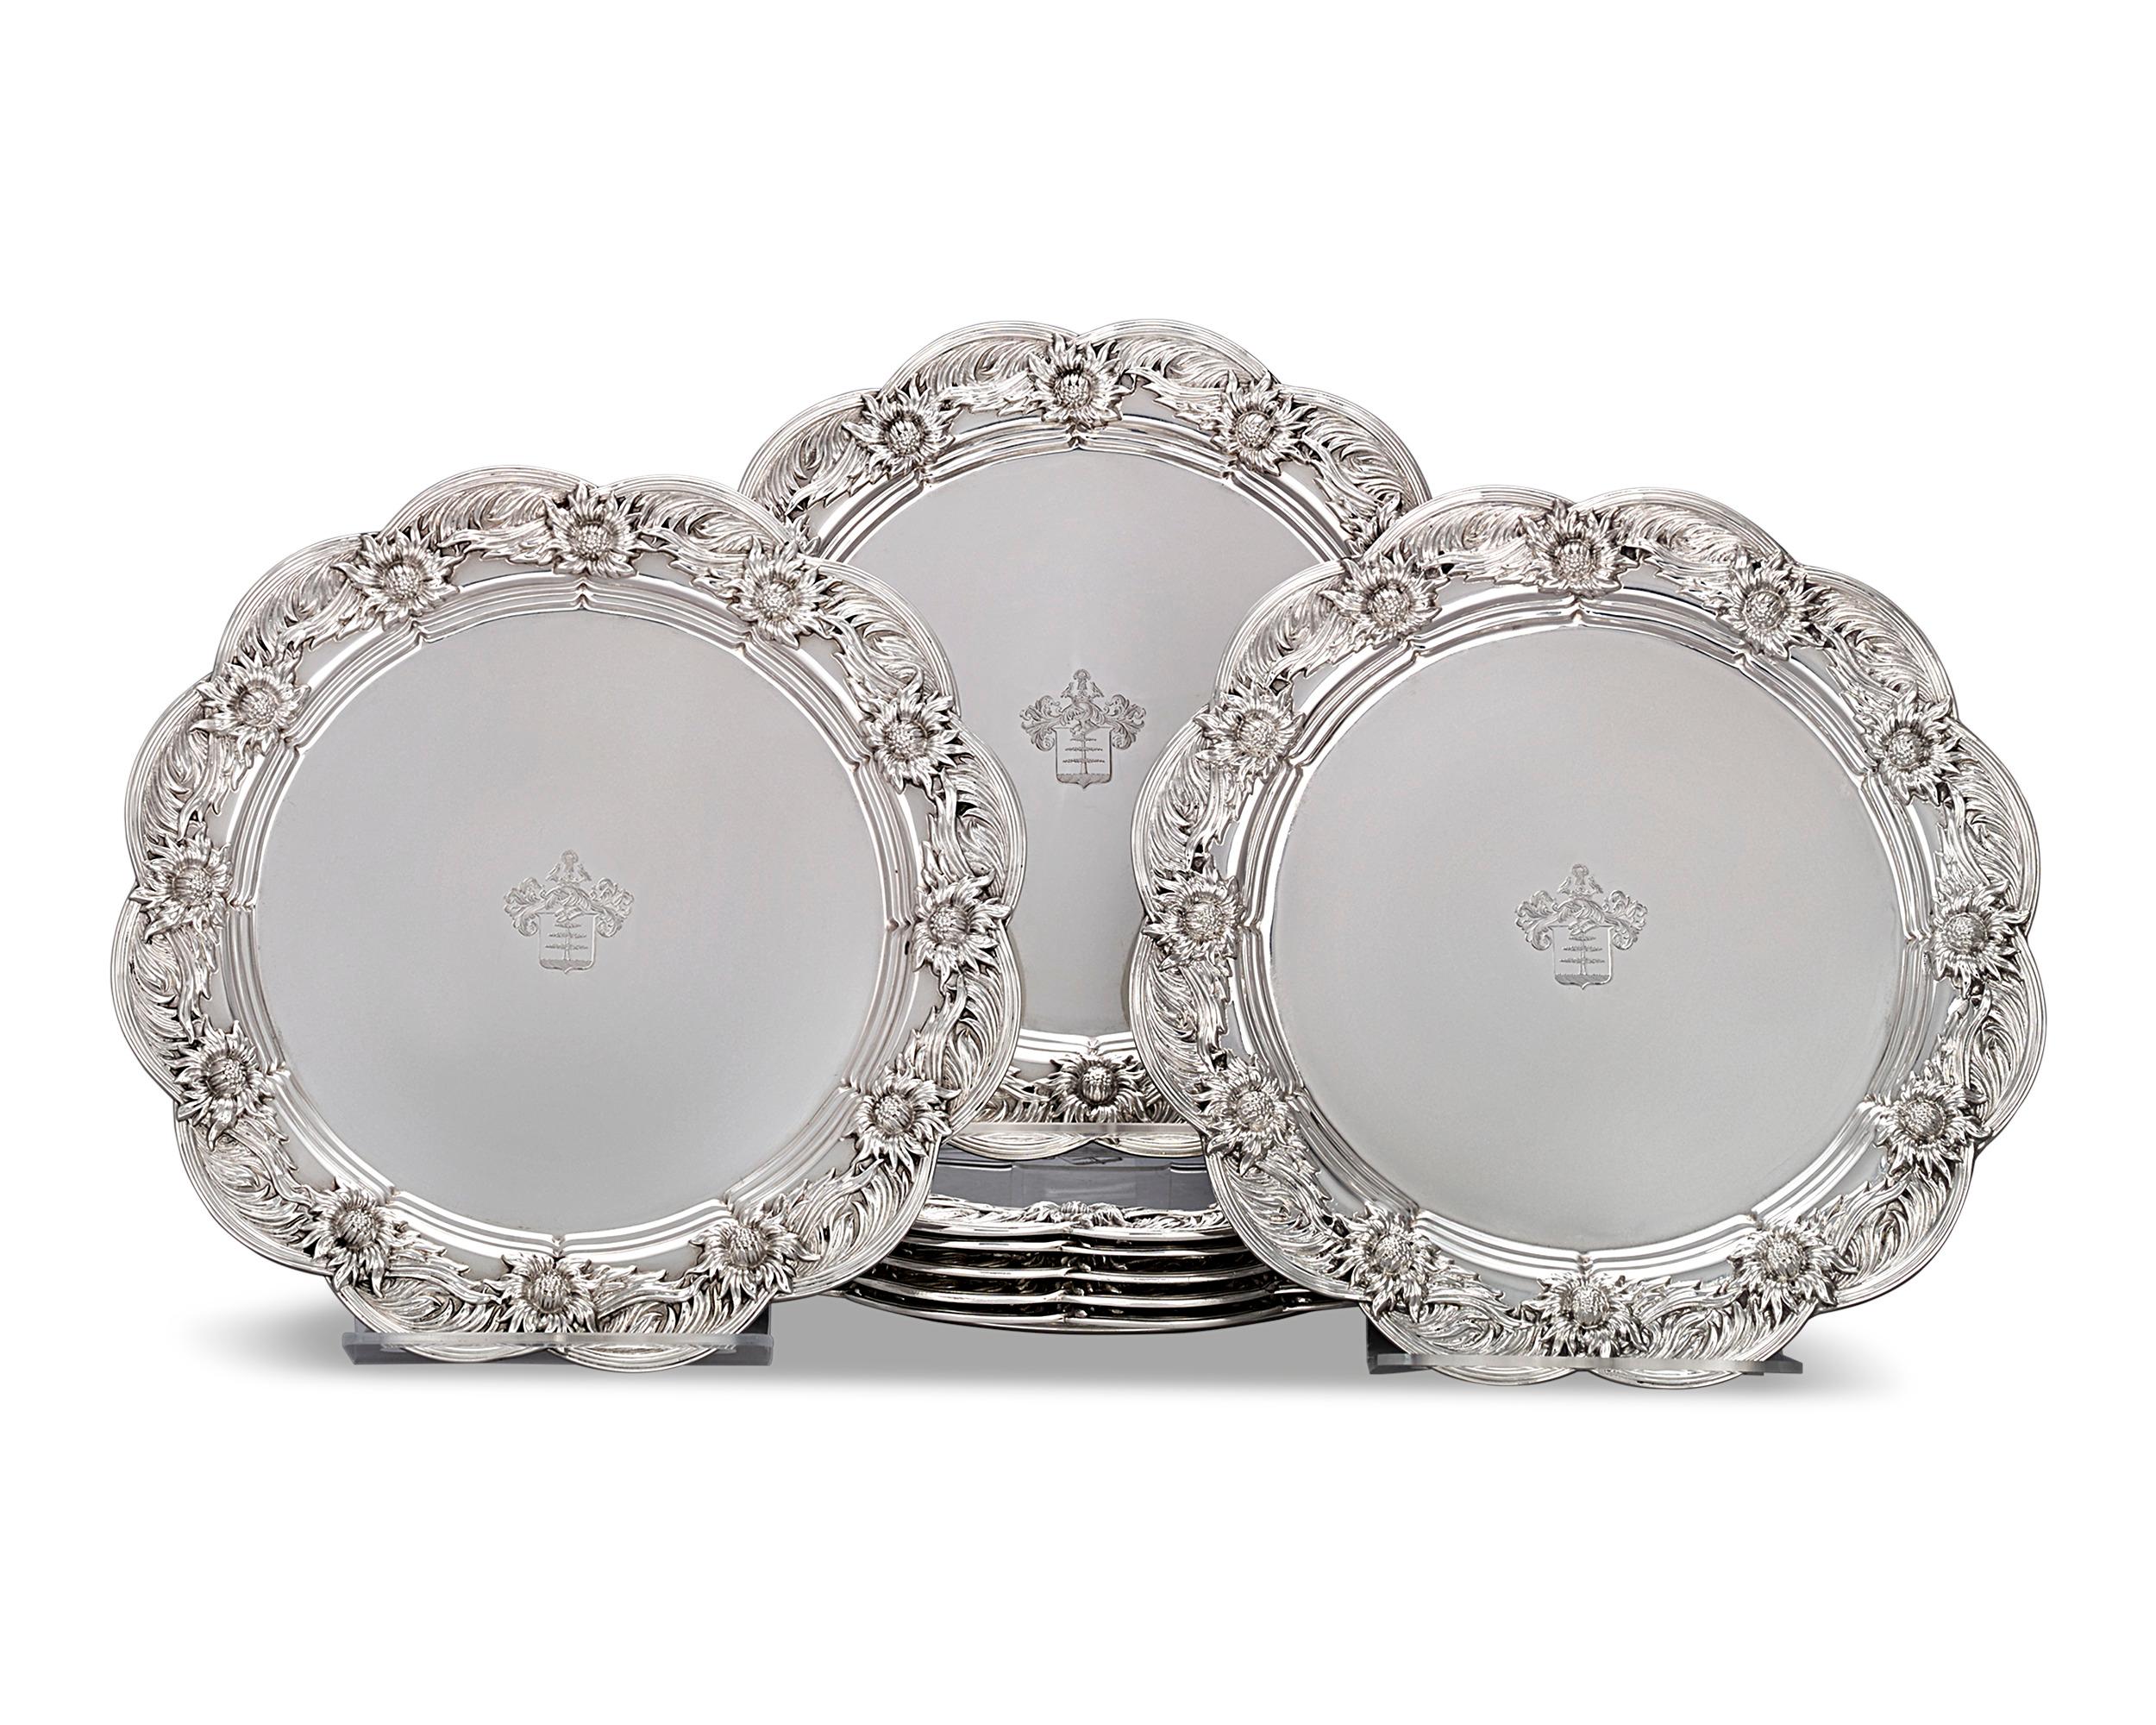 This beautifully crafted set of eight sterling silver dinner plates features the highly regarded Chrysanthemum pattern. Made by Tiffany & Co., each plate is masterfully executed, from their elaborate floral motifs to the delicately etched coat of